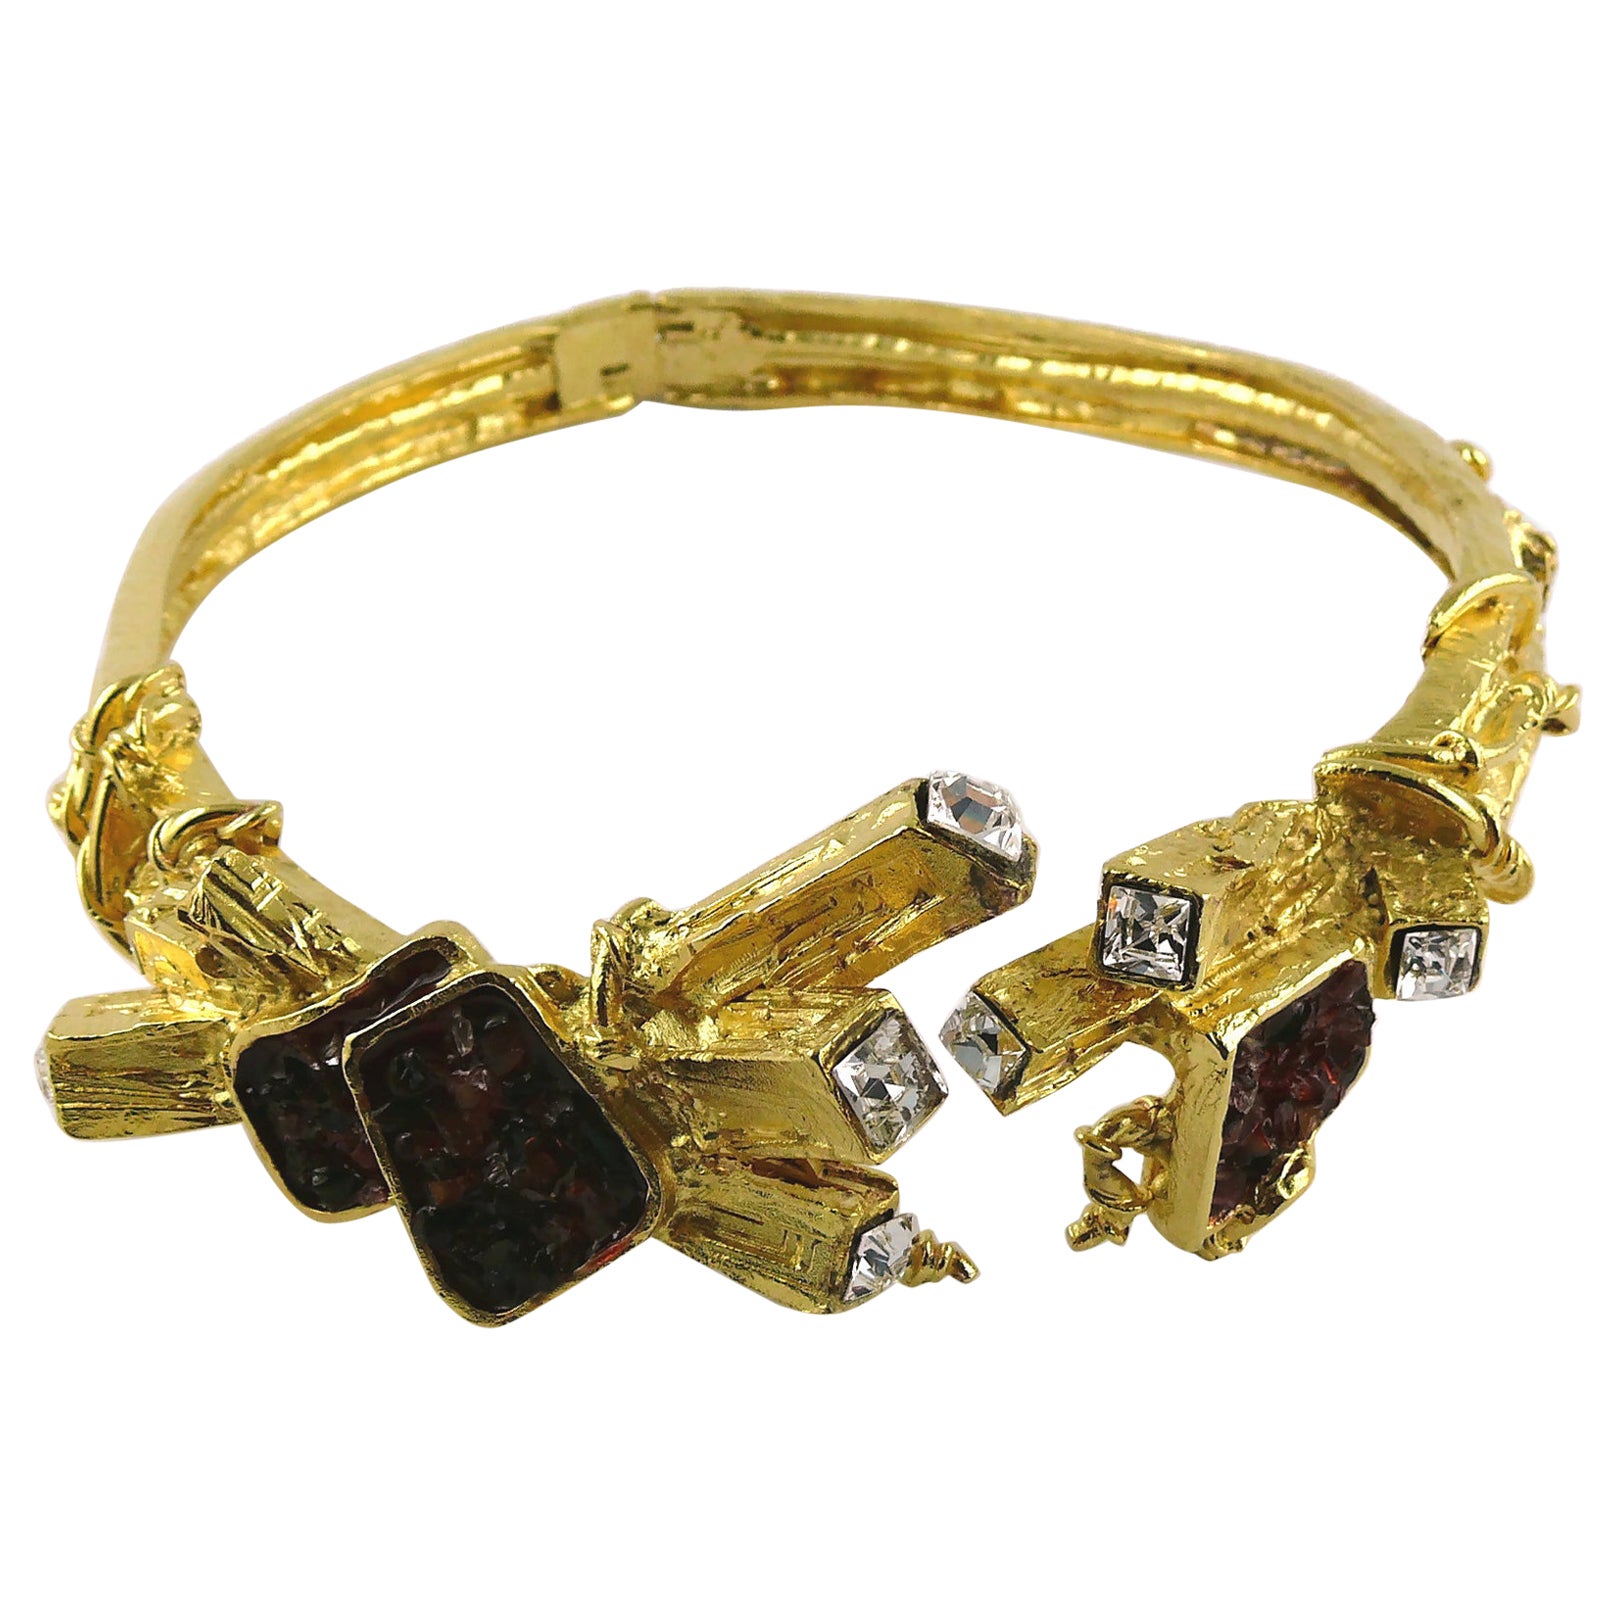 Christian Lacroix Vintage Gold Toned Jewelled Clamper Choker Necklace